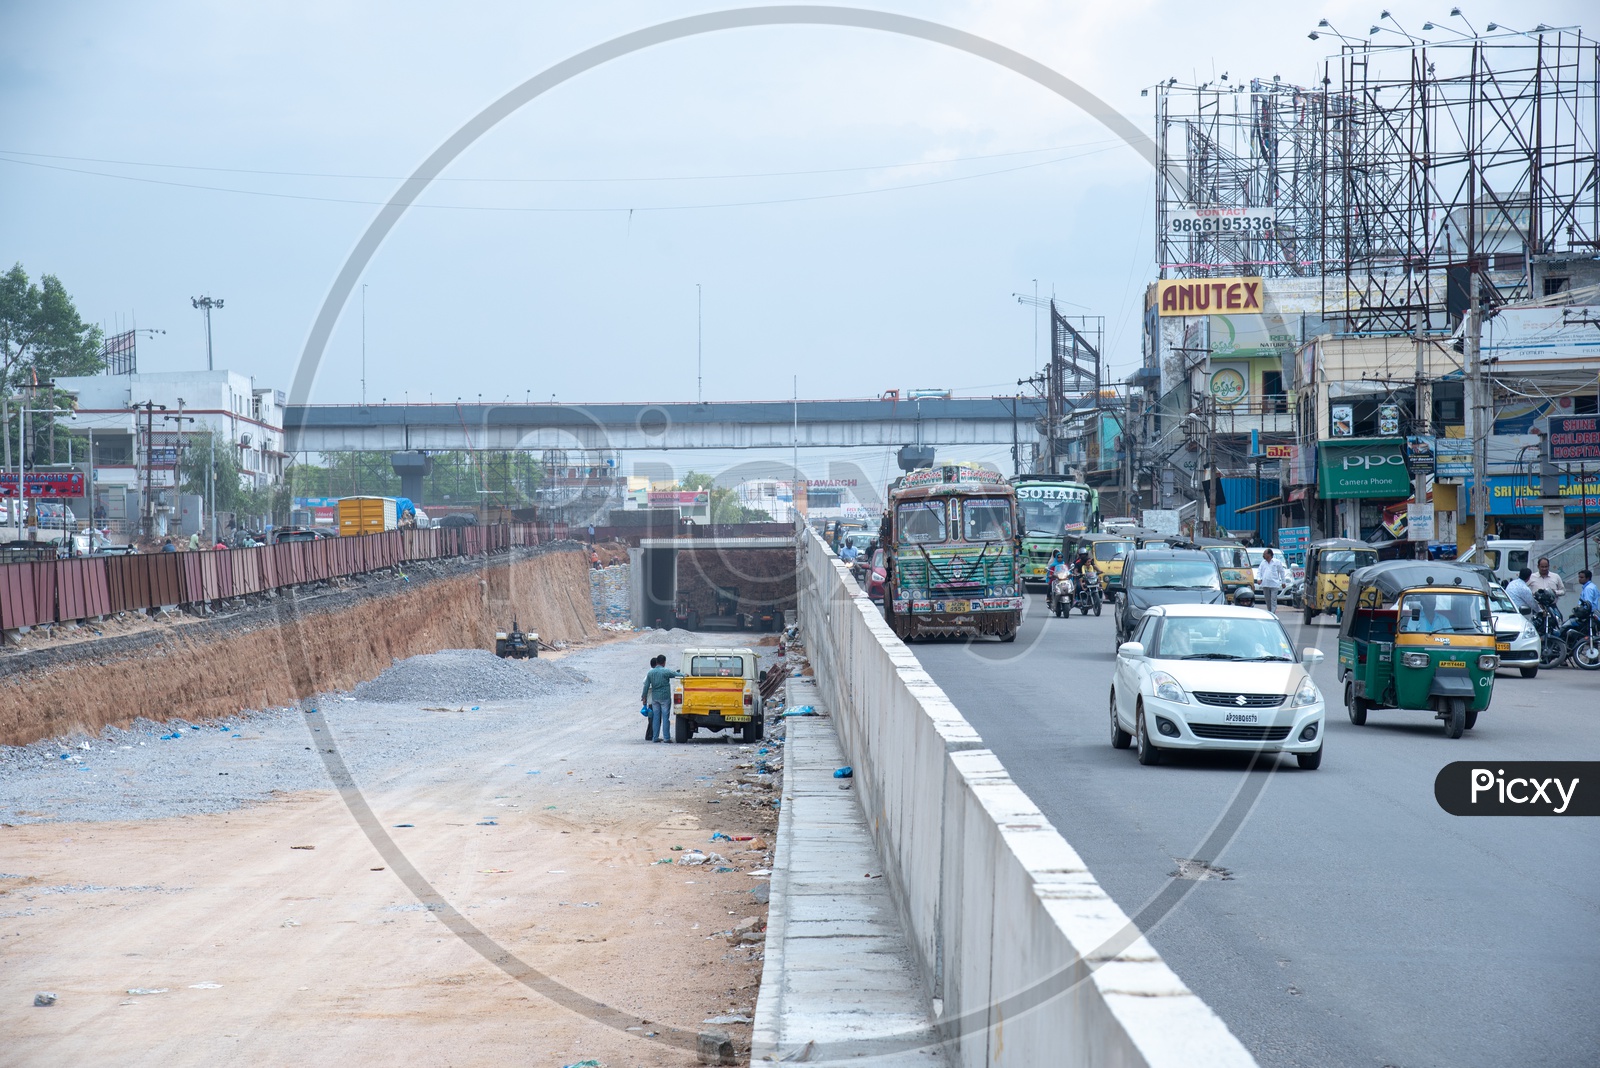 Construction Site Of a Flyover   At  Cities  With Commuting  Vehicles On The  Roads